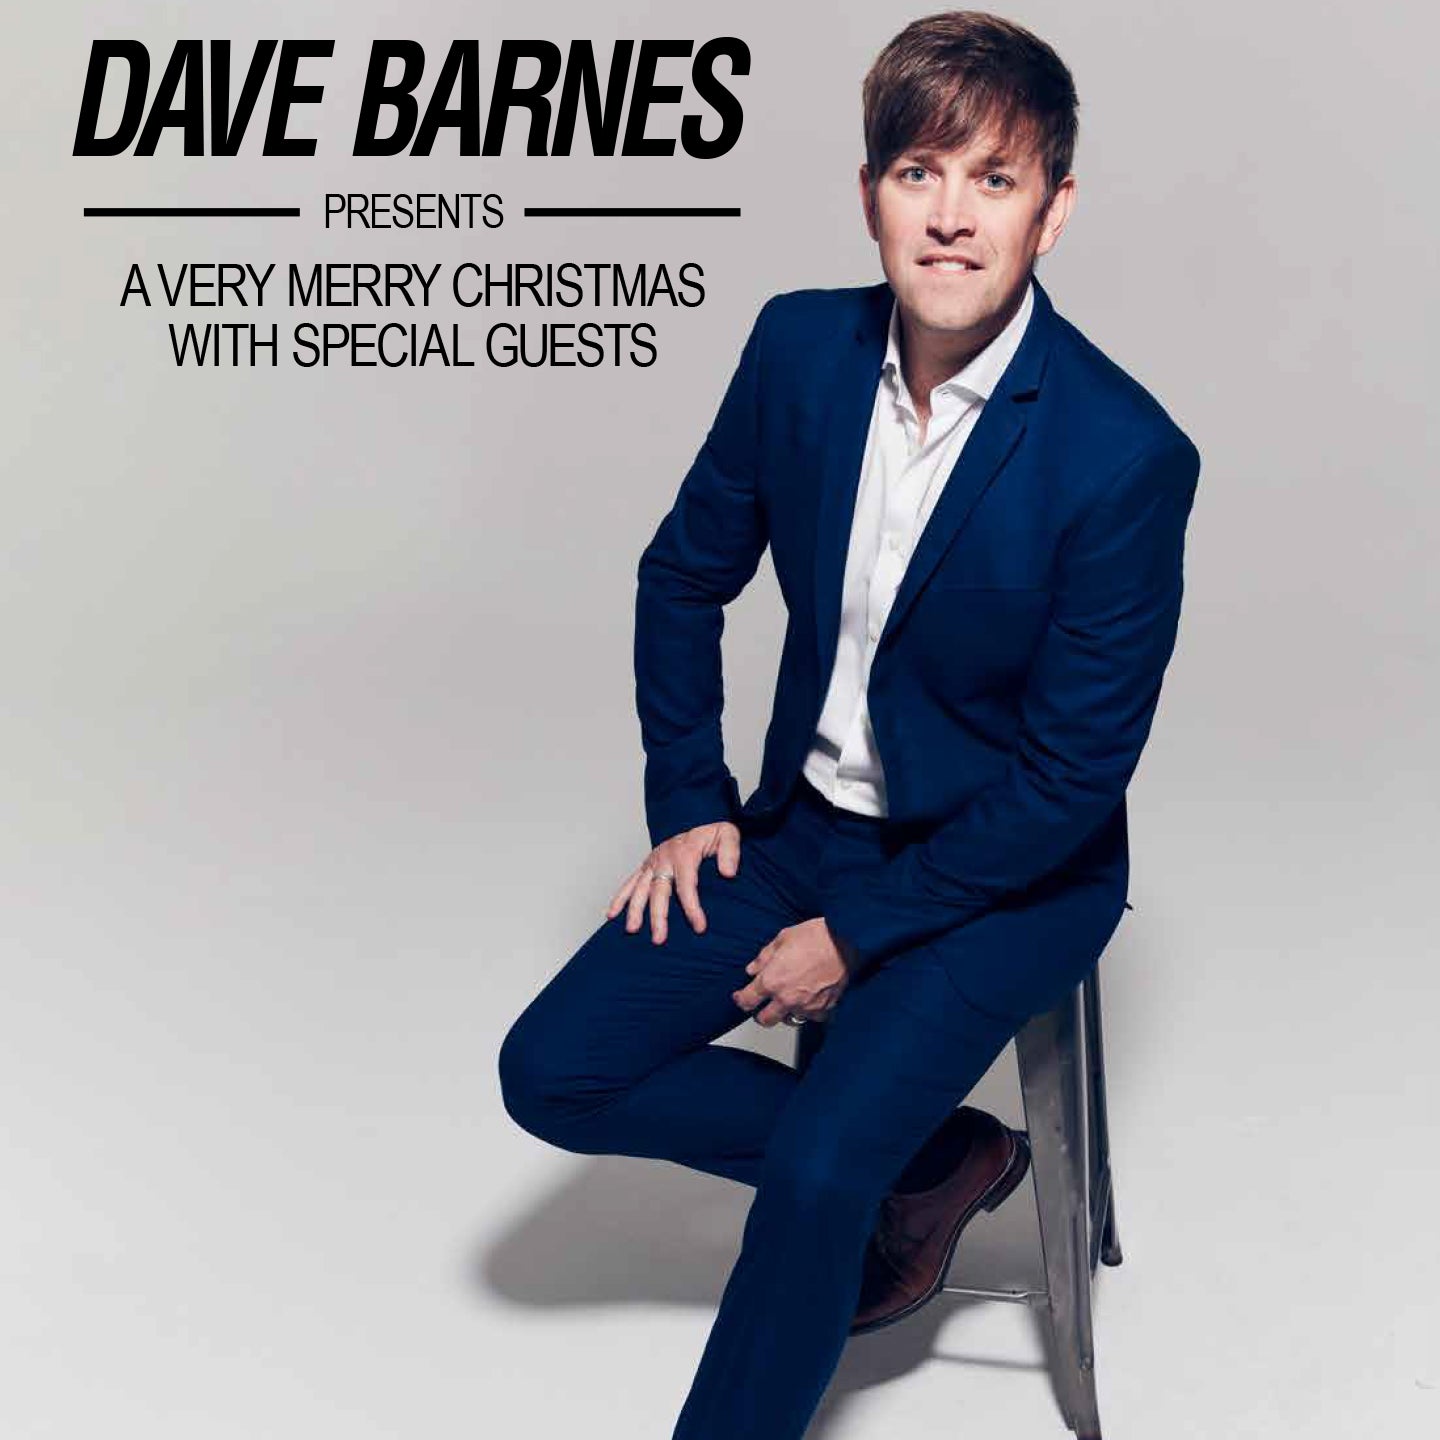 Dave Barnes Presents A Very Merry Christmas with Special Guests